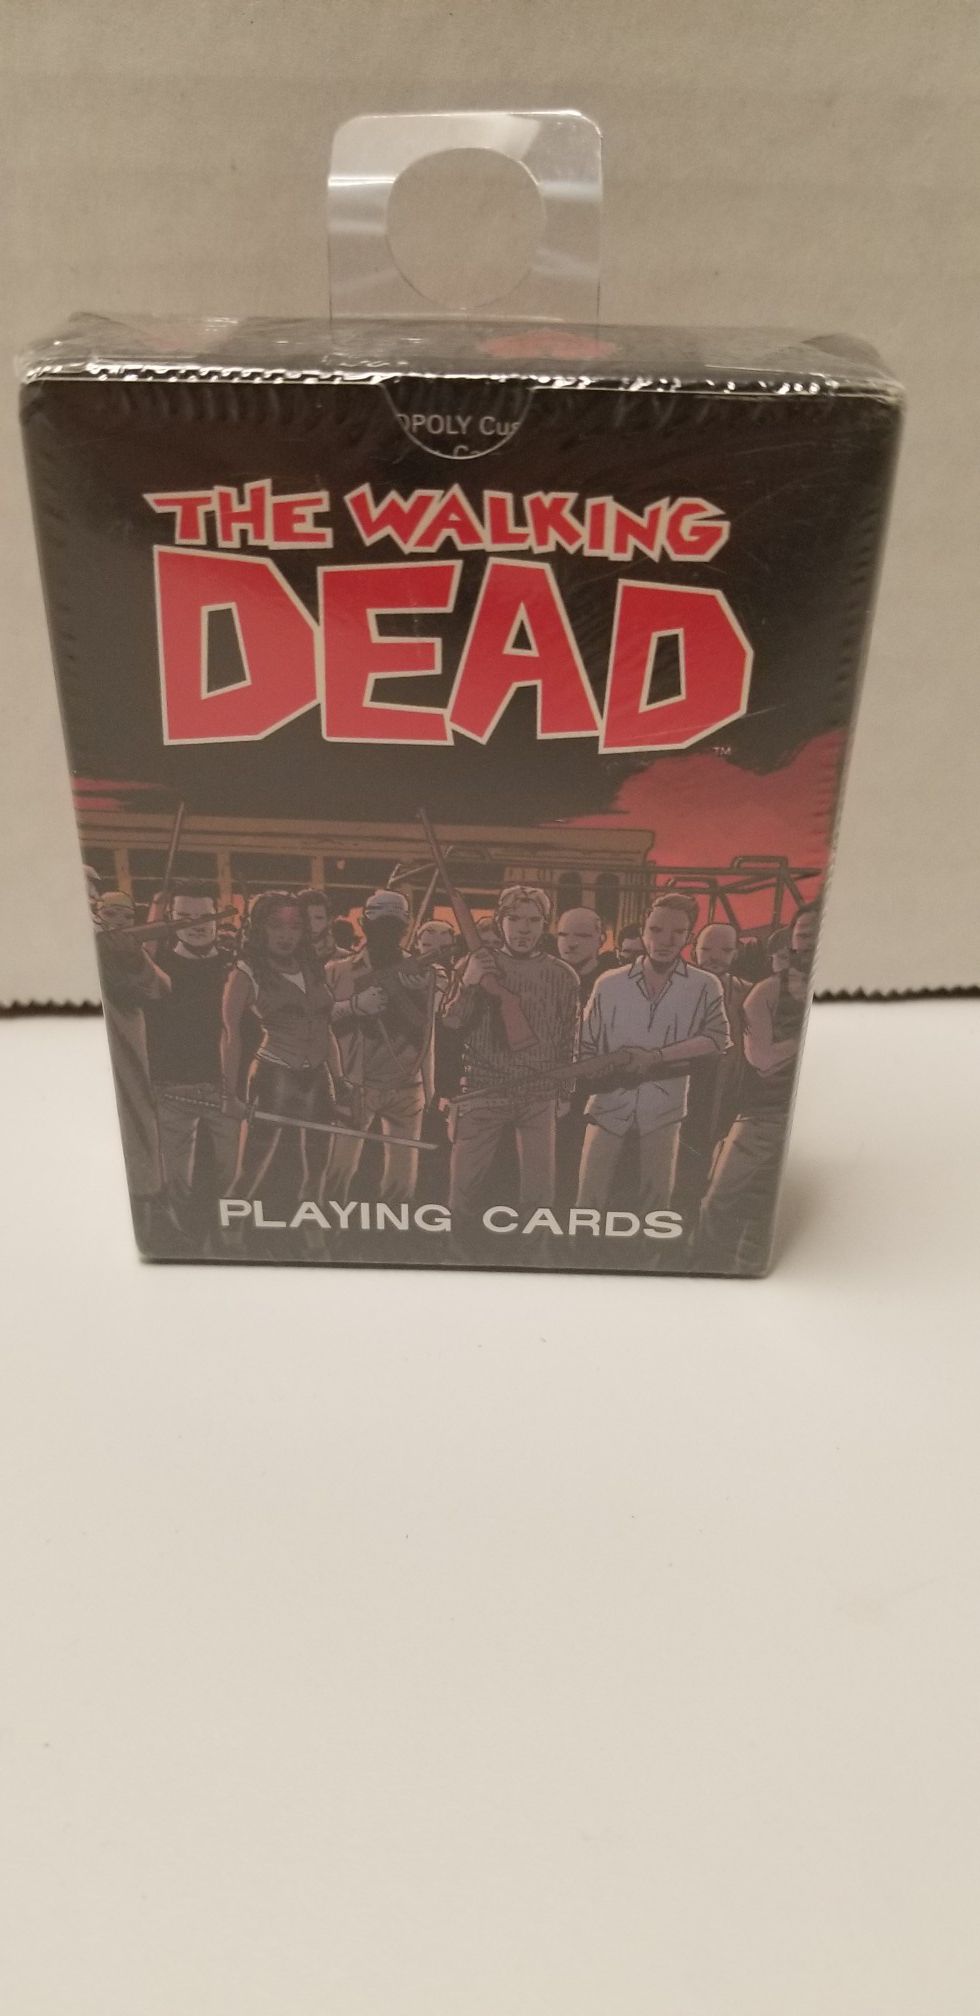 The walking dead playing cards